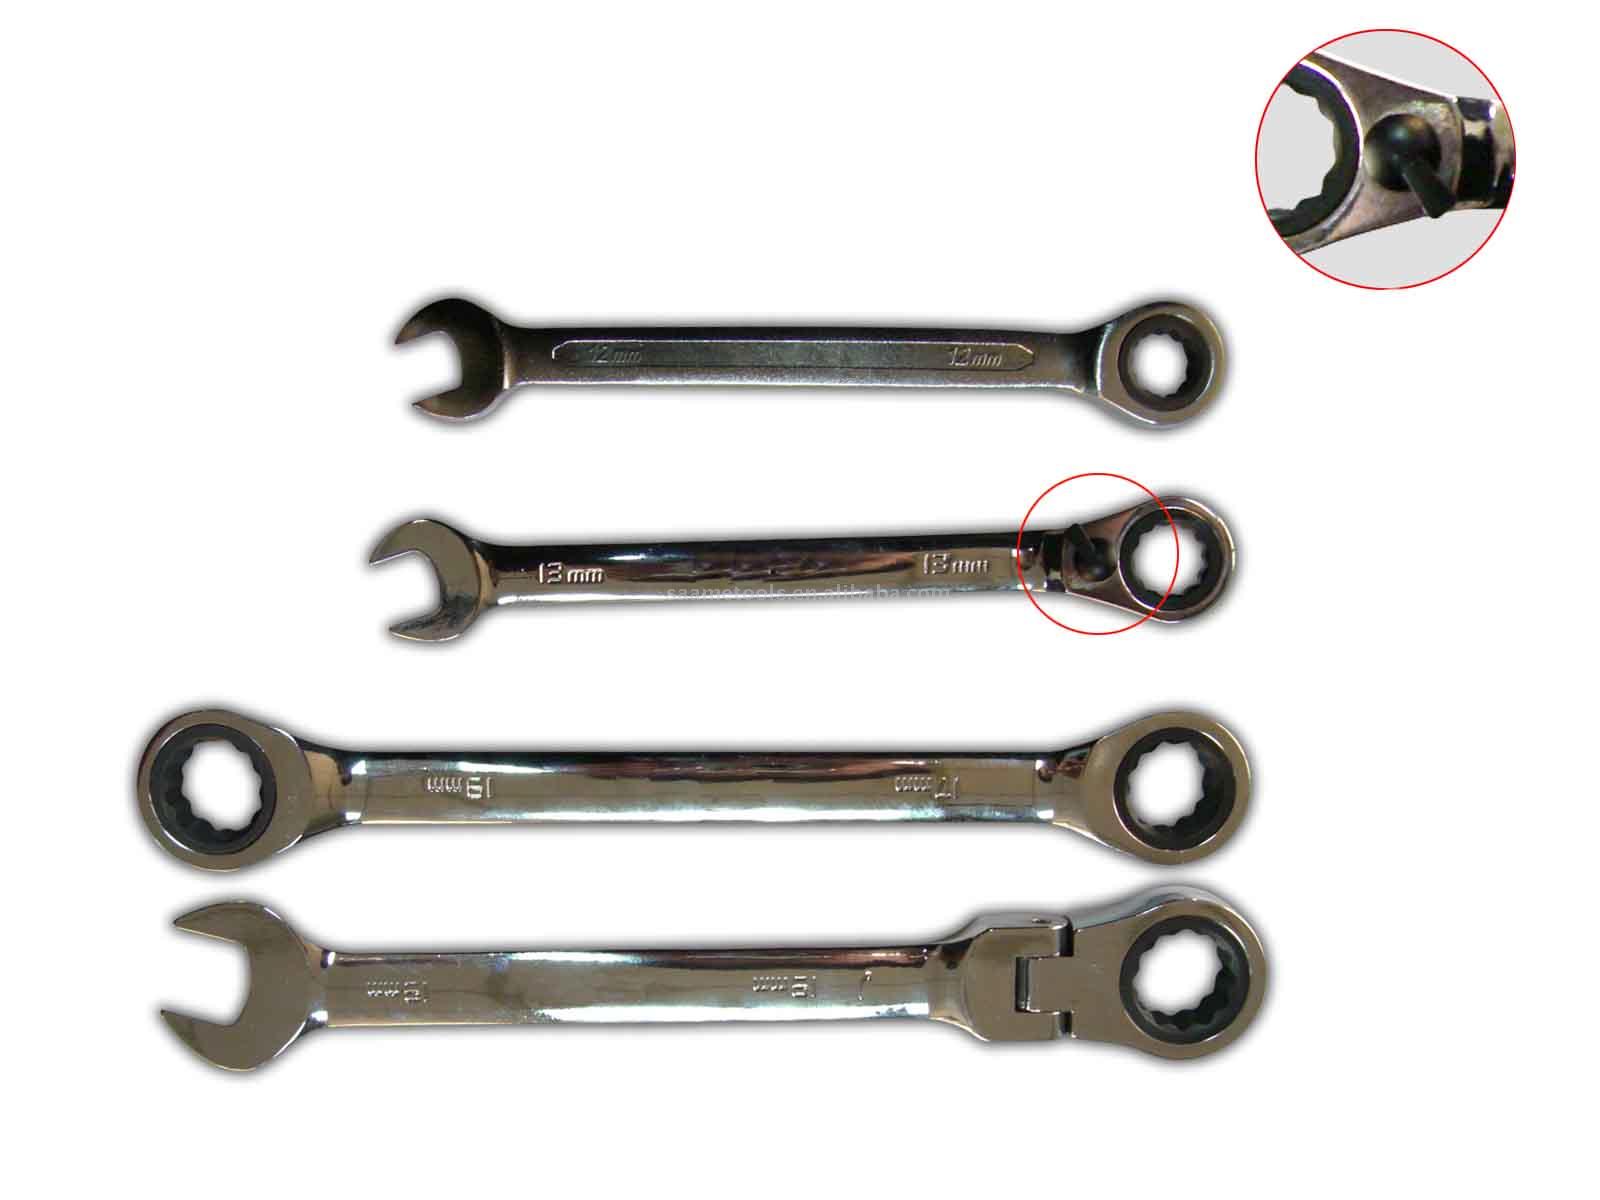  Ratchet Wrenches ( Ratchet Wrenches)